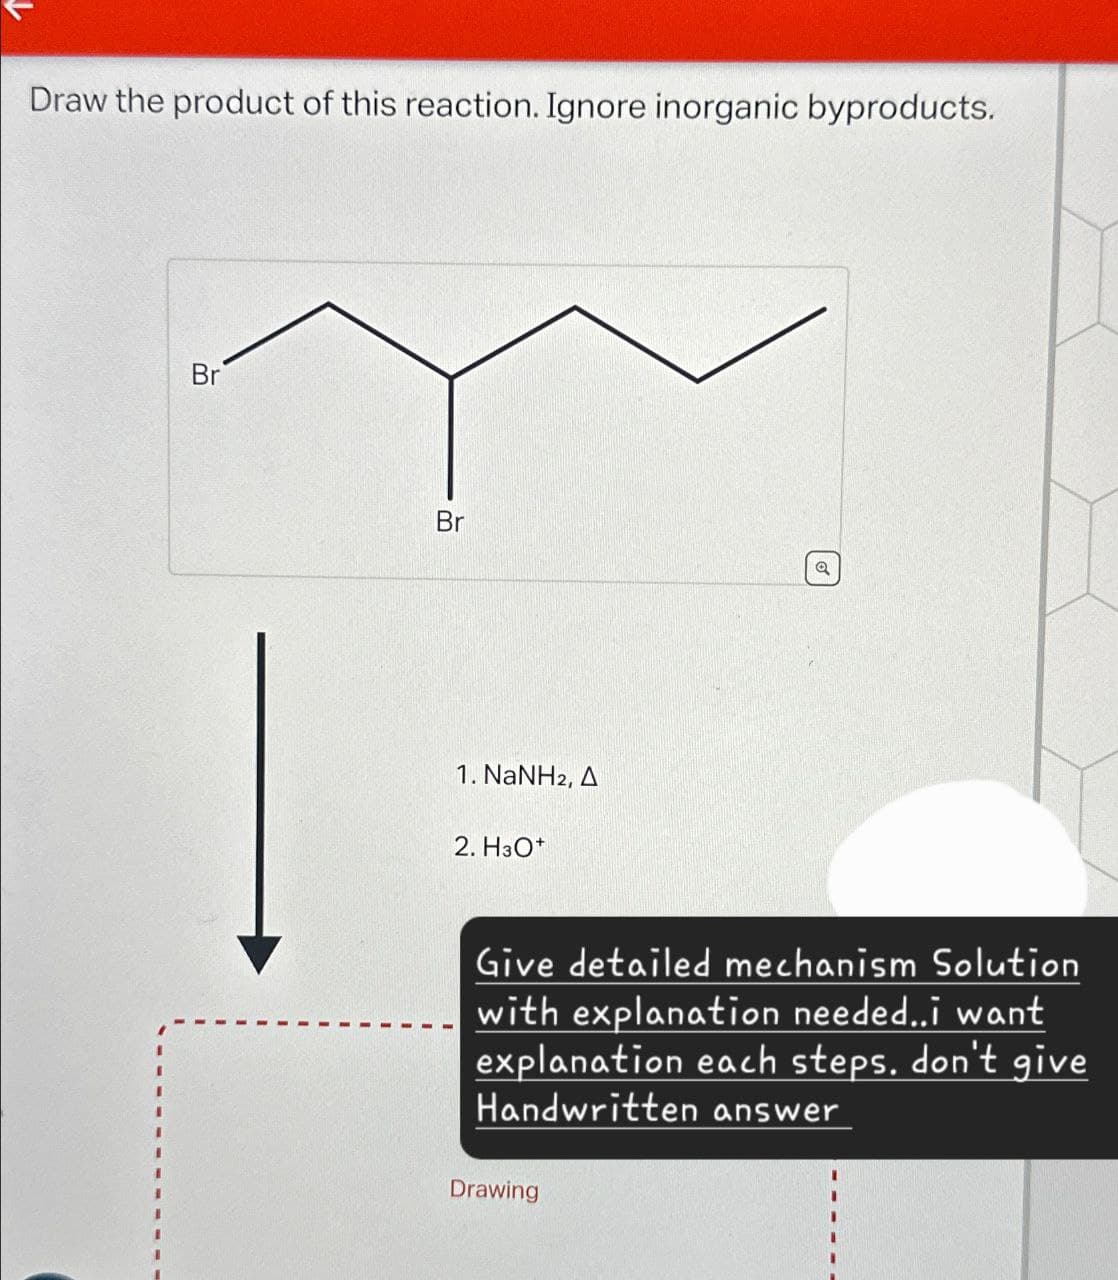 Draw the product of this reaction. Ignore inorganic byproducts.
Br
Br
Q
1. NaNH2, A
2. H3O+
Give detailed mechanism Solution
with explanation needed..i want
explanation each steps. don't give
Handwritten answer
Drawing